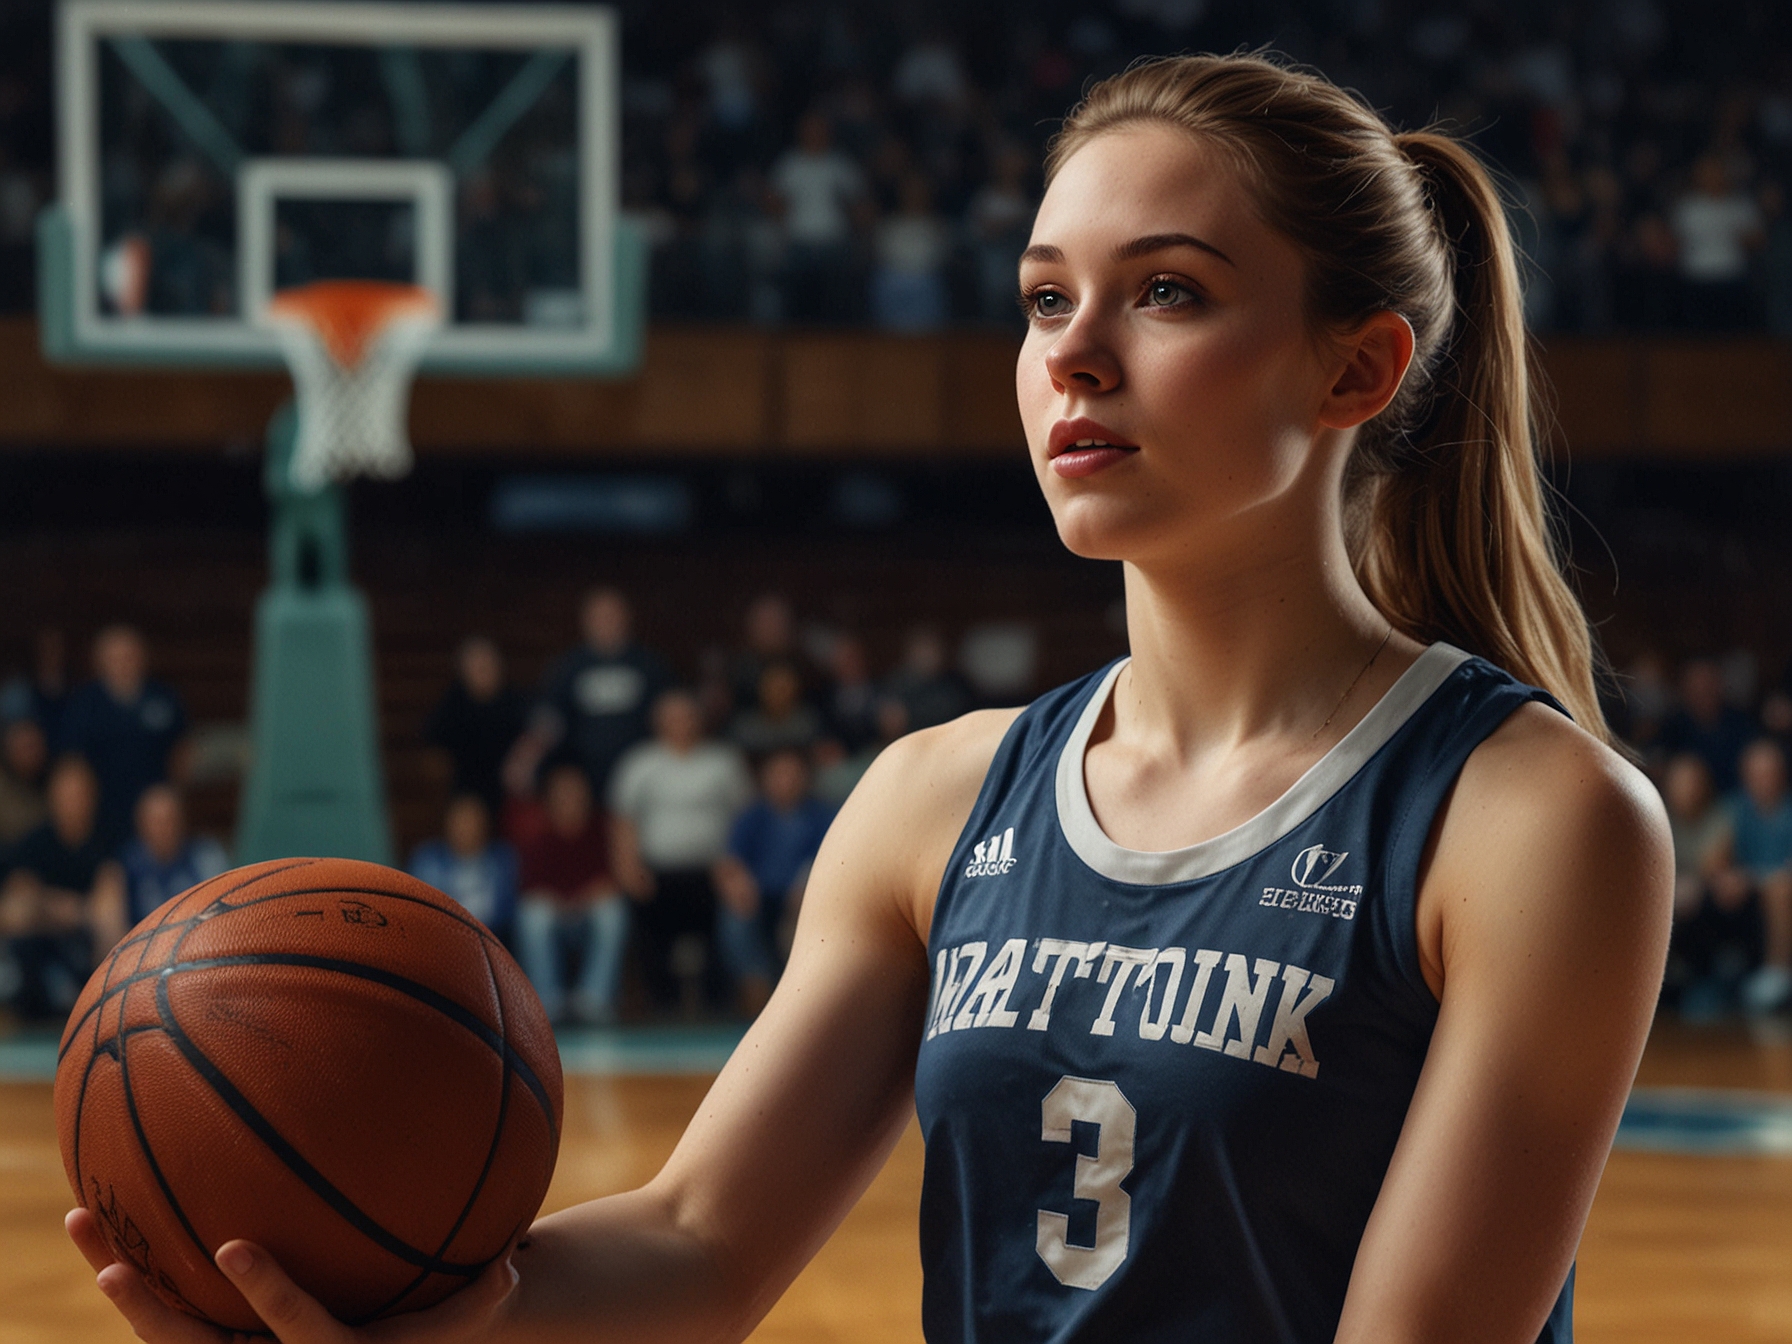 Caitlin Clark poised on the basketball court, skillfully executing a three-point shot, showcasing her talent that has won her both admiration and intense fan support.